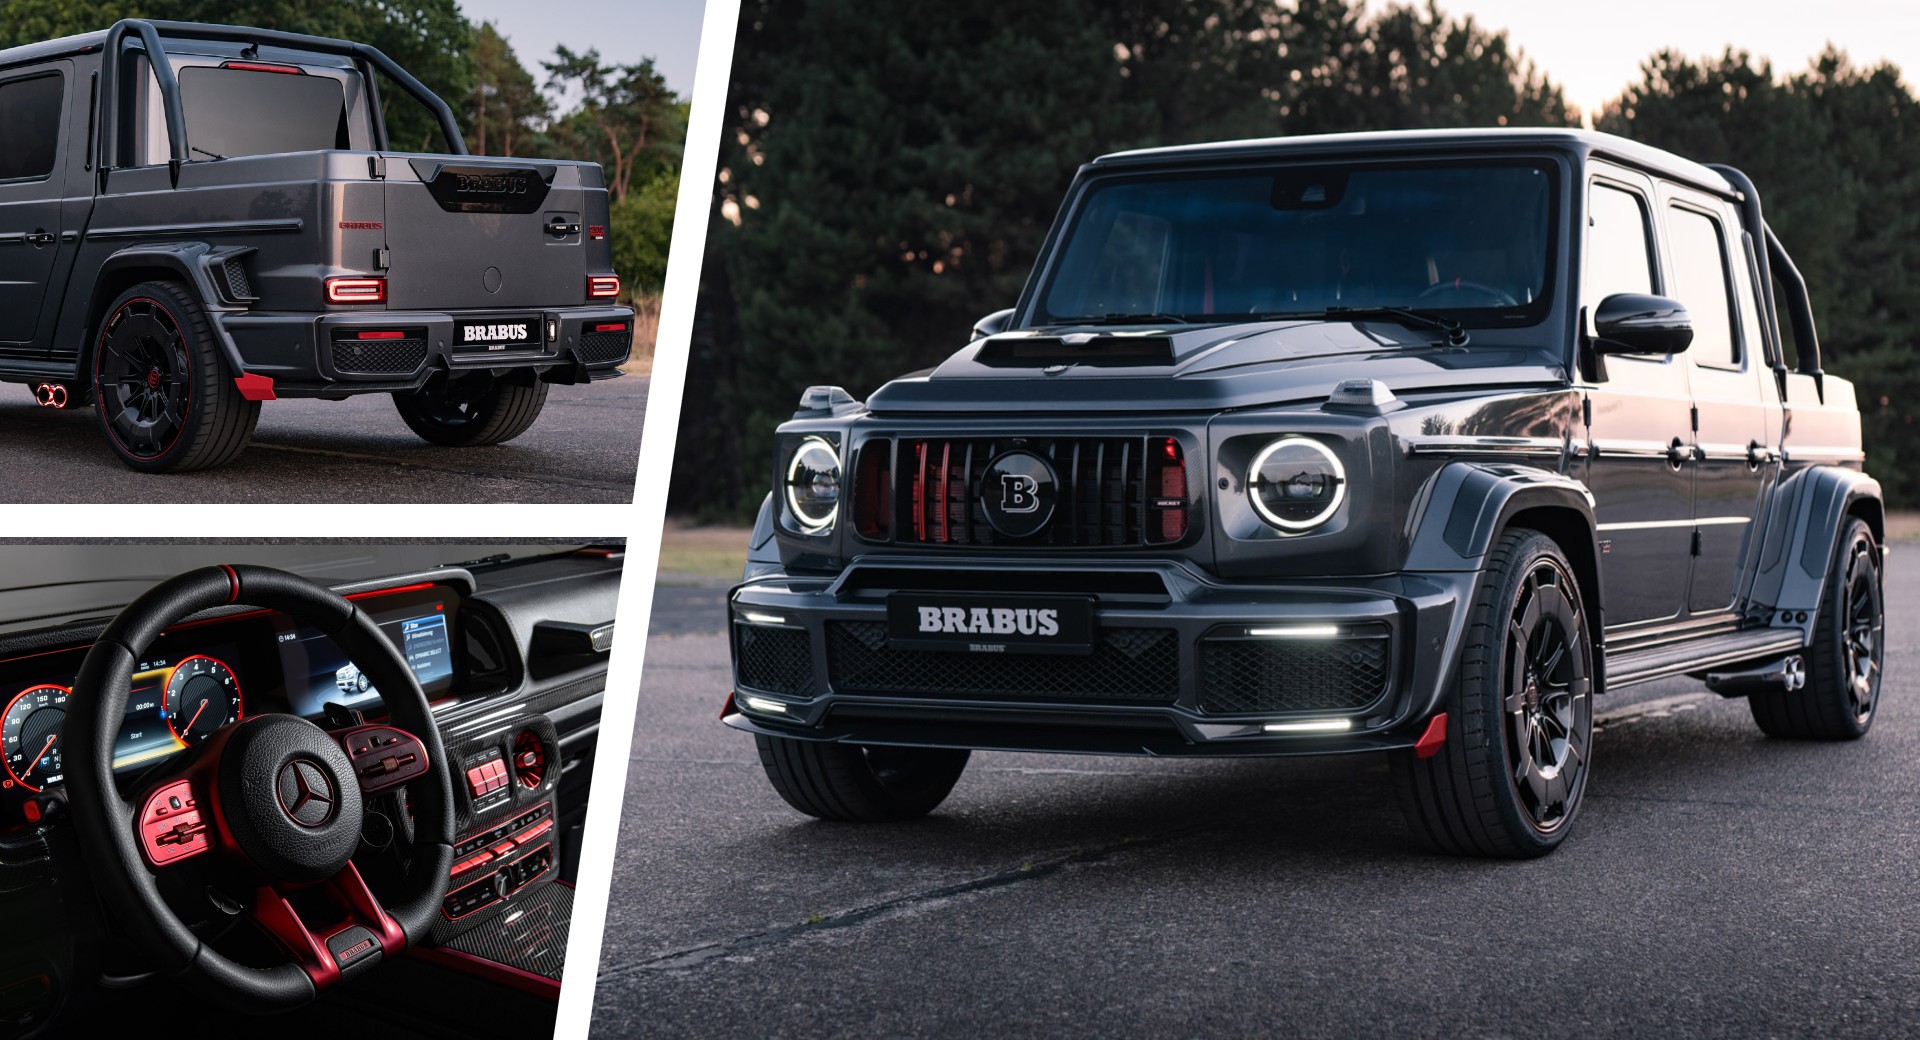 New Brabus P 900 Rocket Edition Is An Insane G-Wagen Pickup Truck With 888  HP